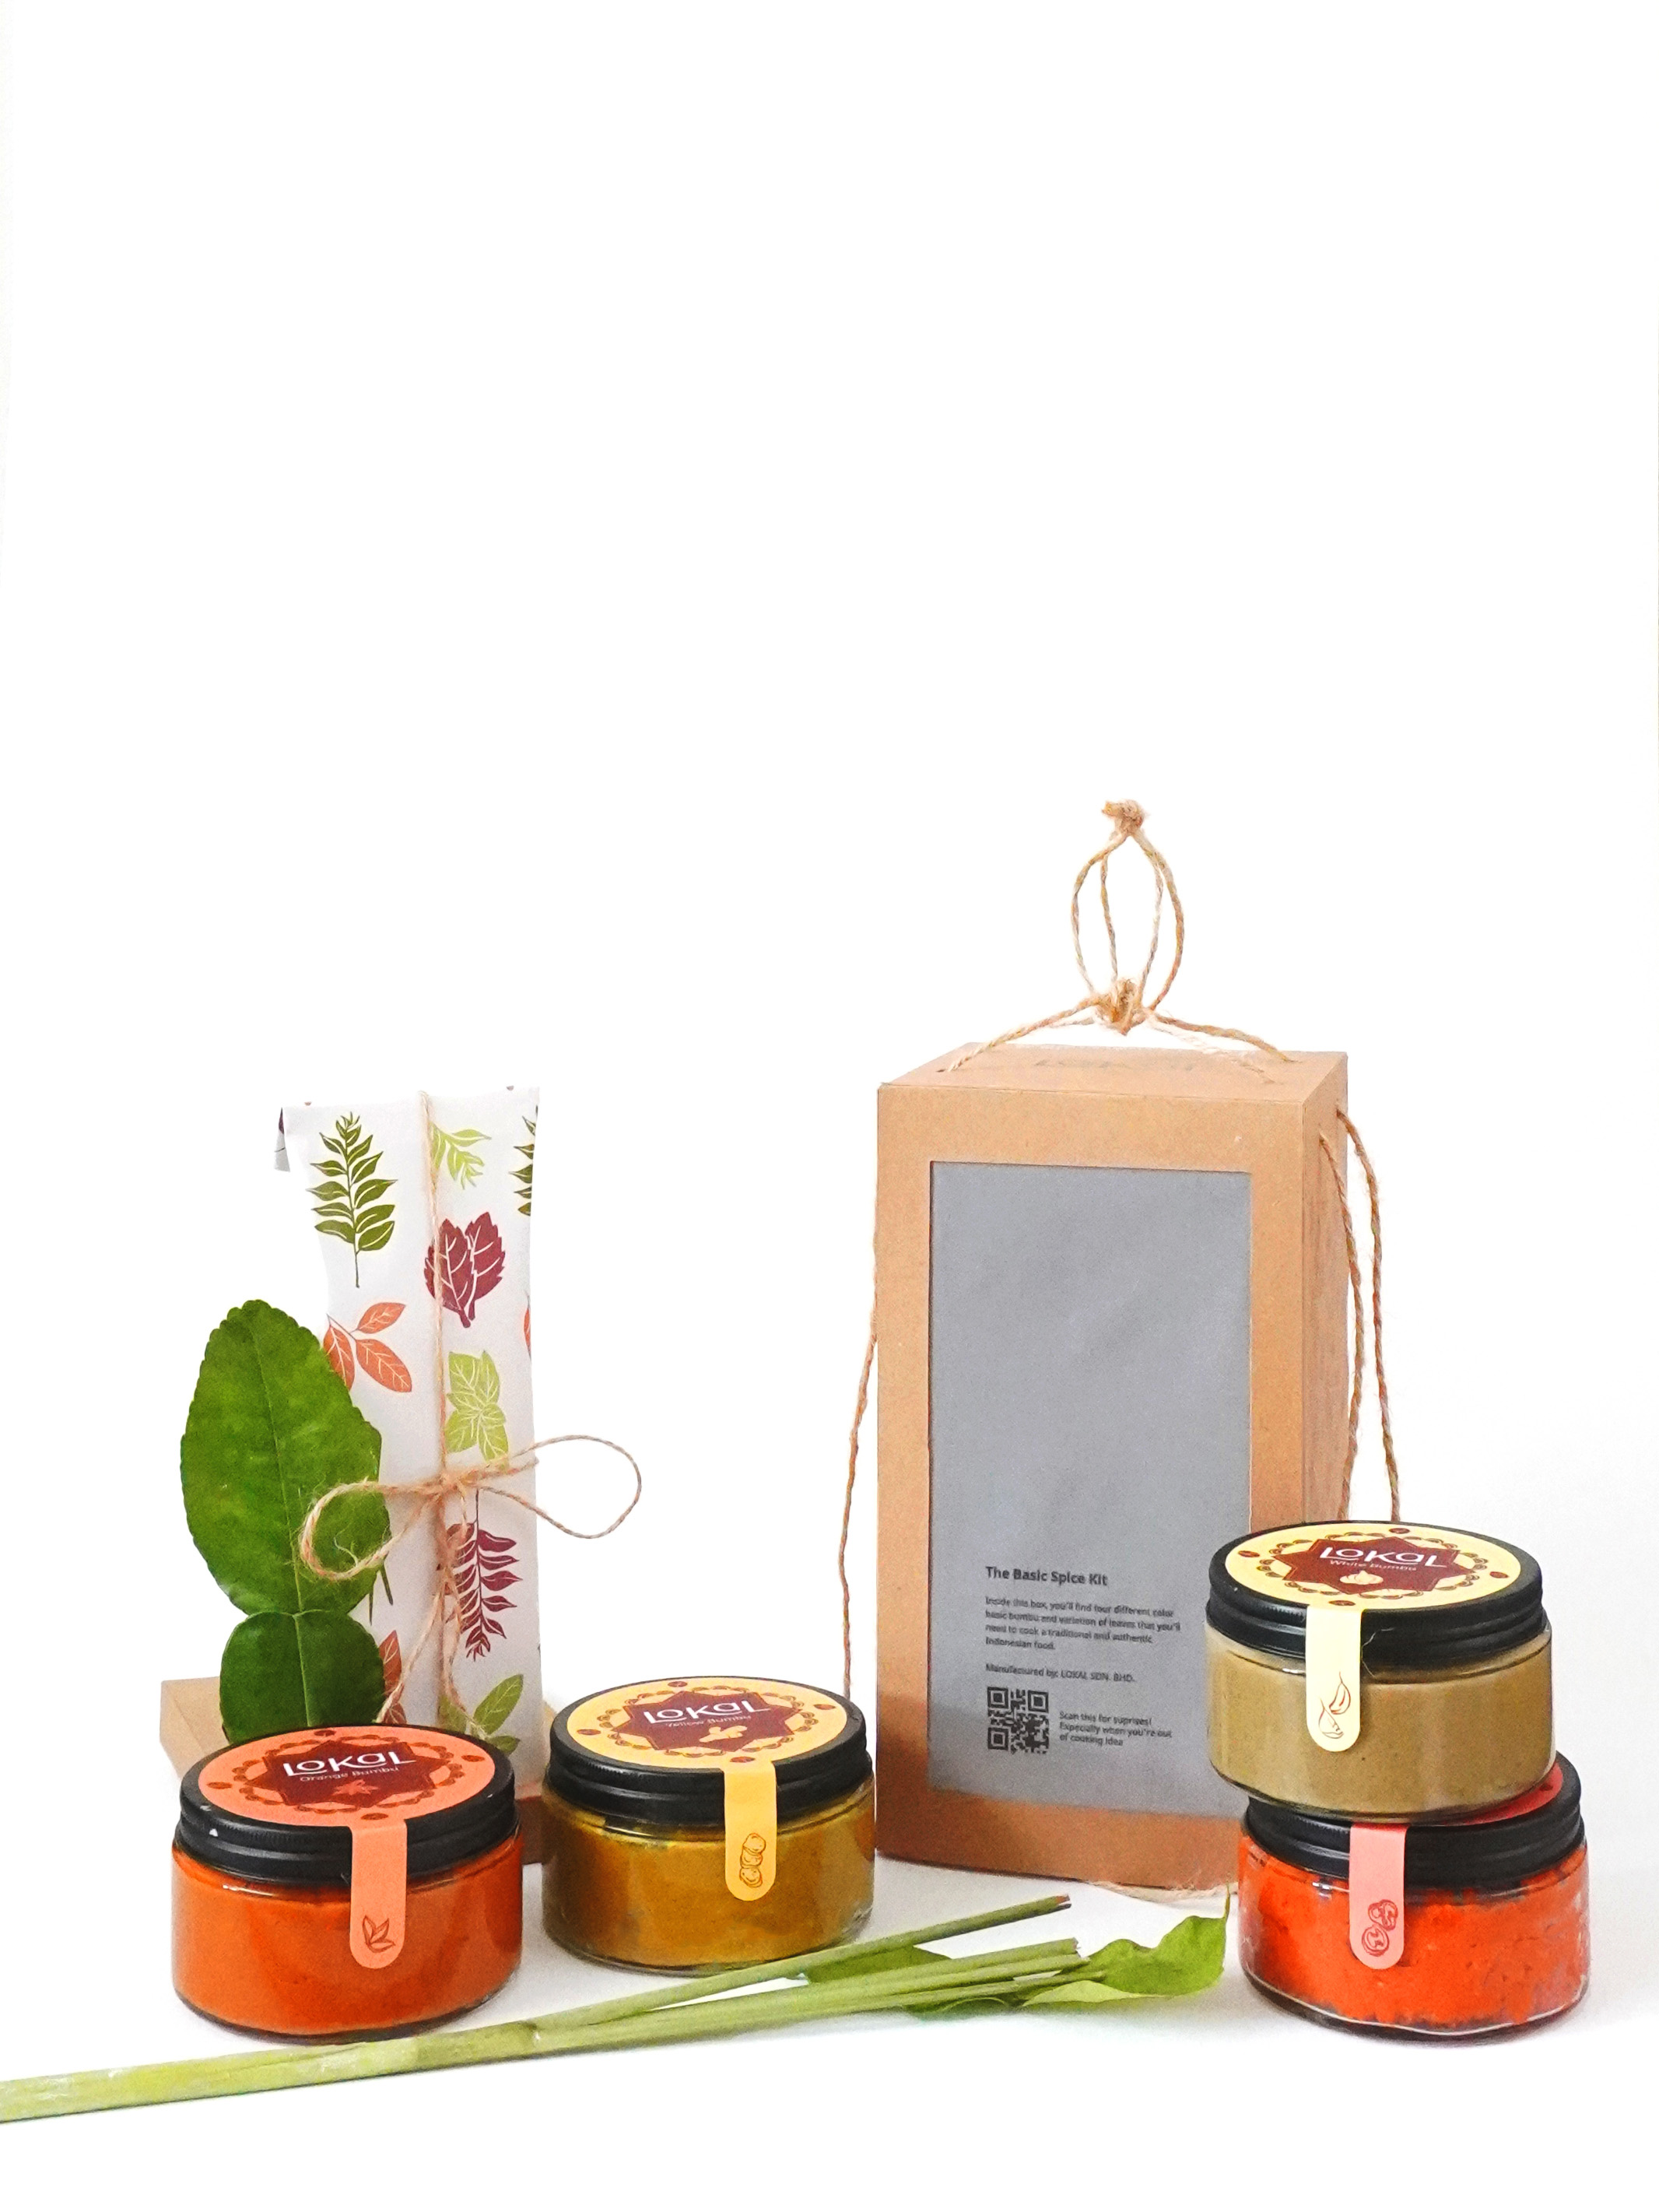 Fiona Alicia Student Packaging Design Concept for a The Basic Spice Kit